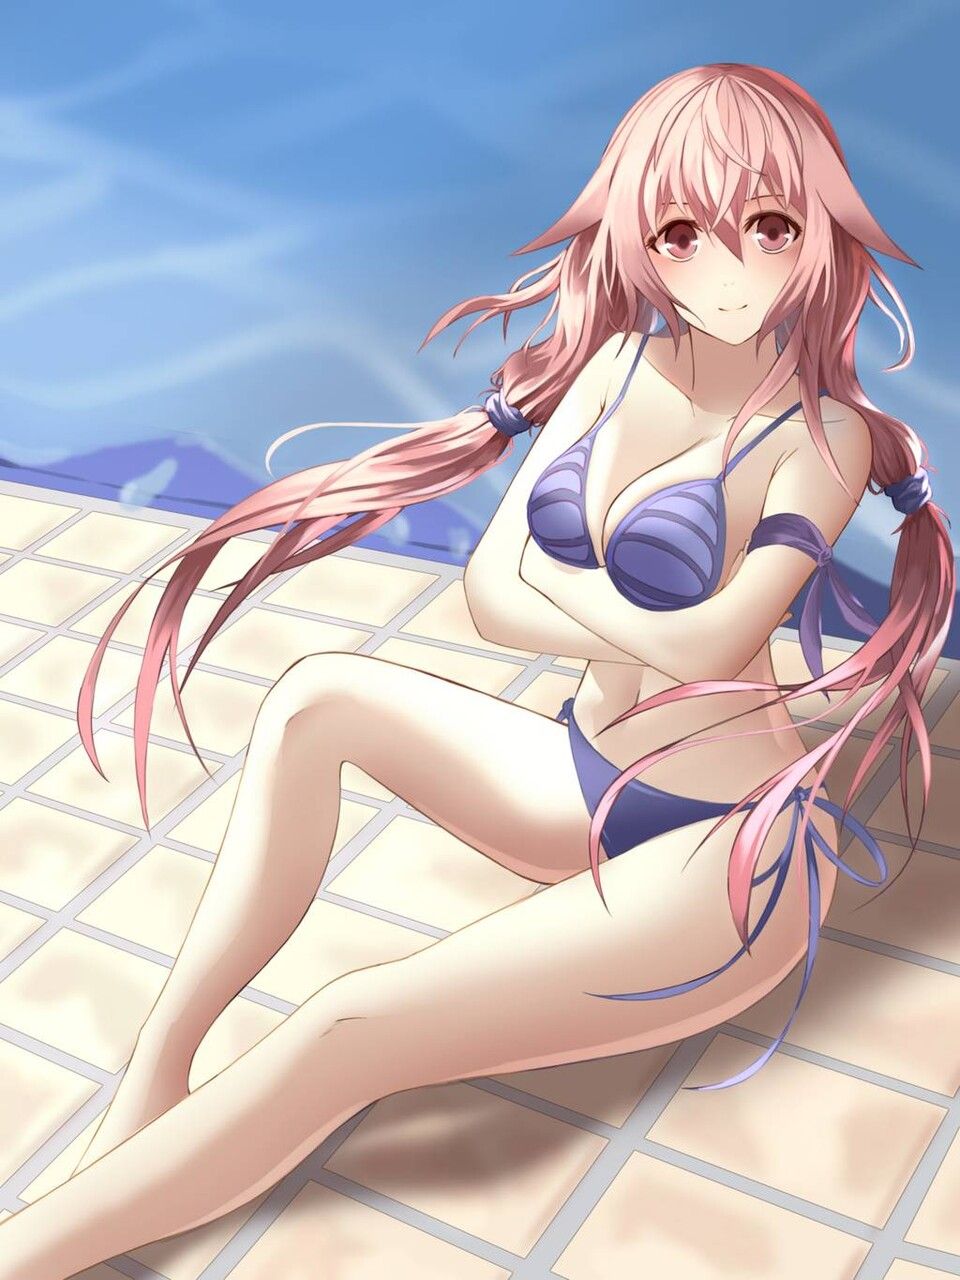 Thread that randomly pastes erotic images of pink hair 10